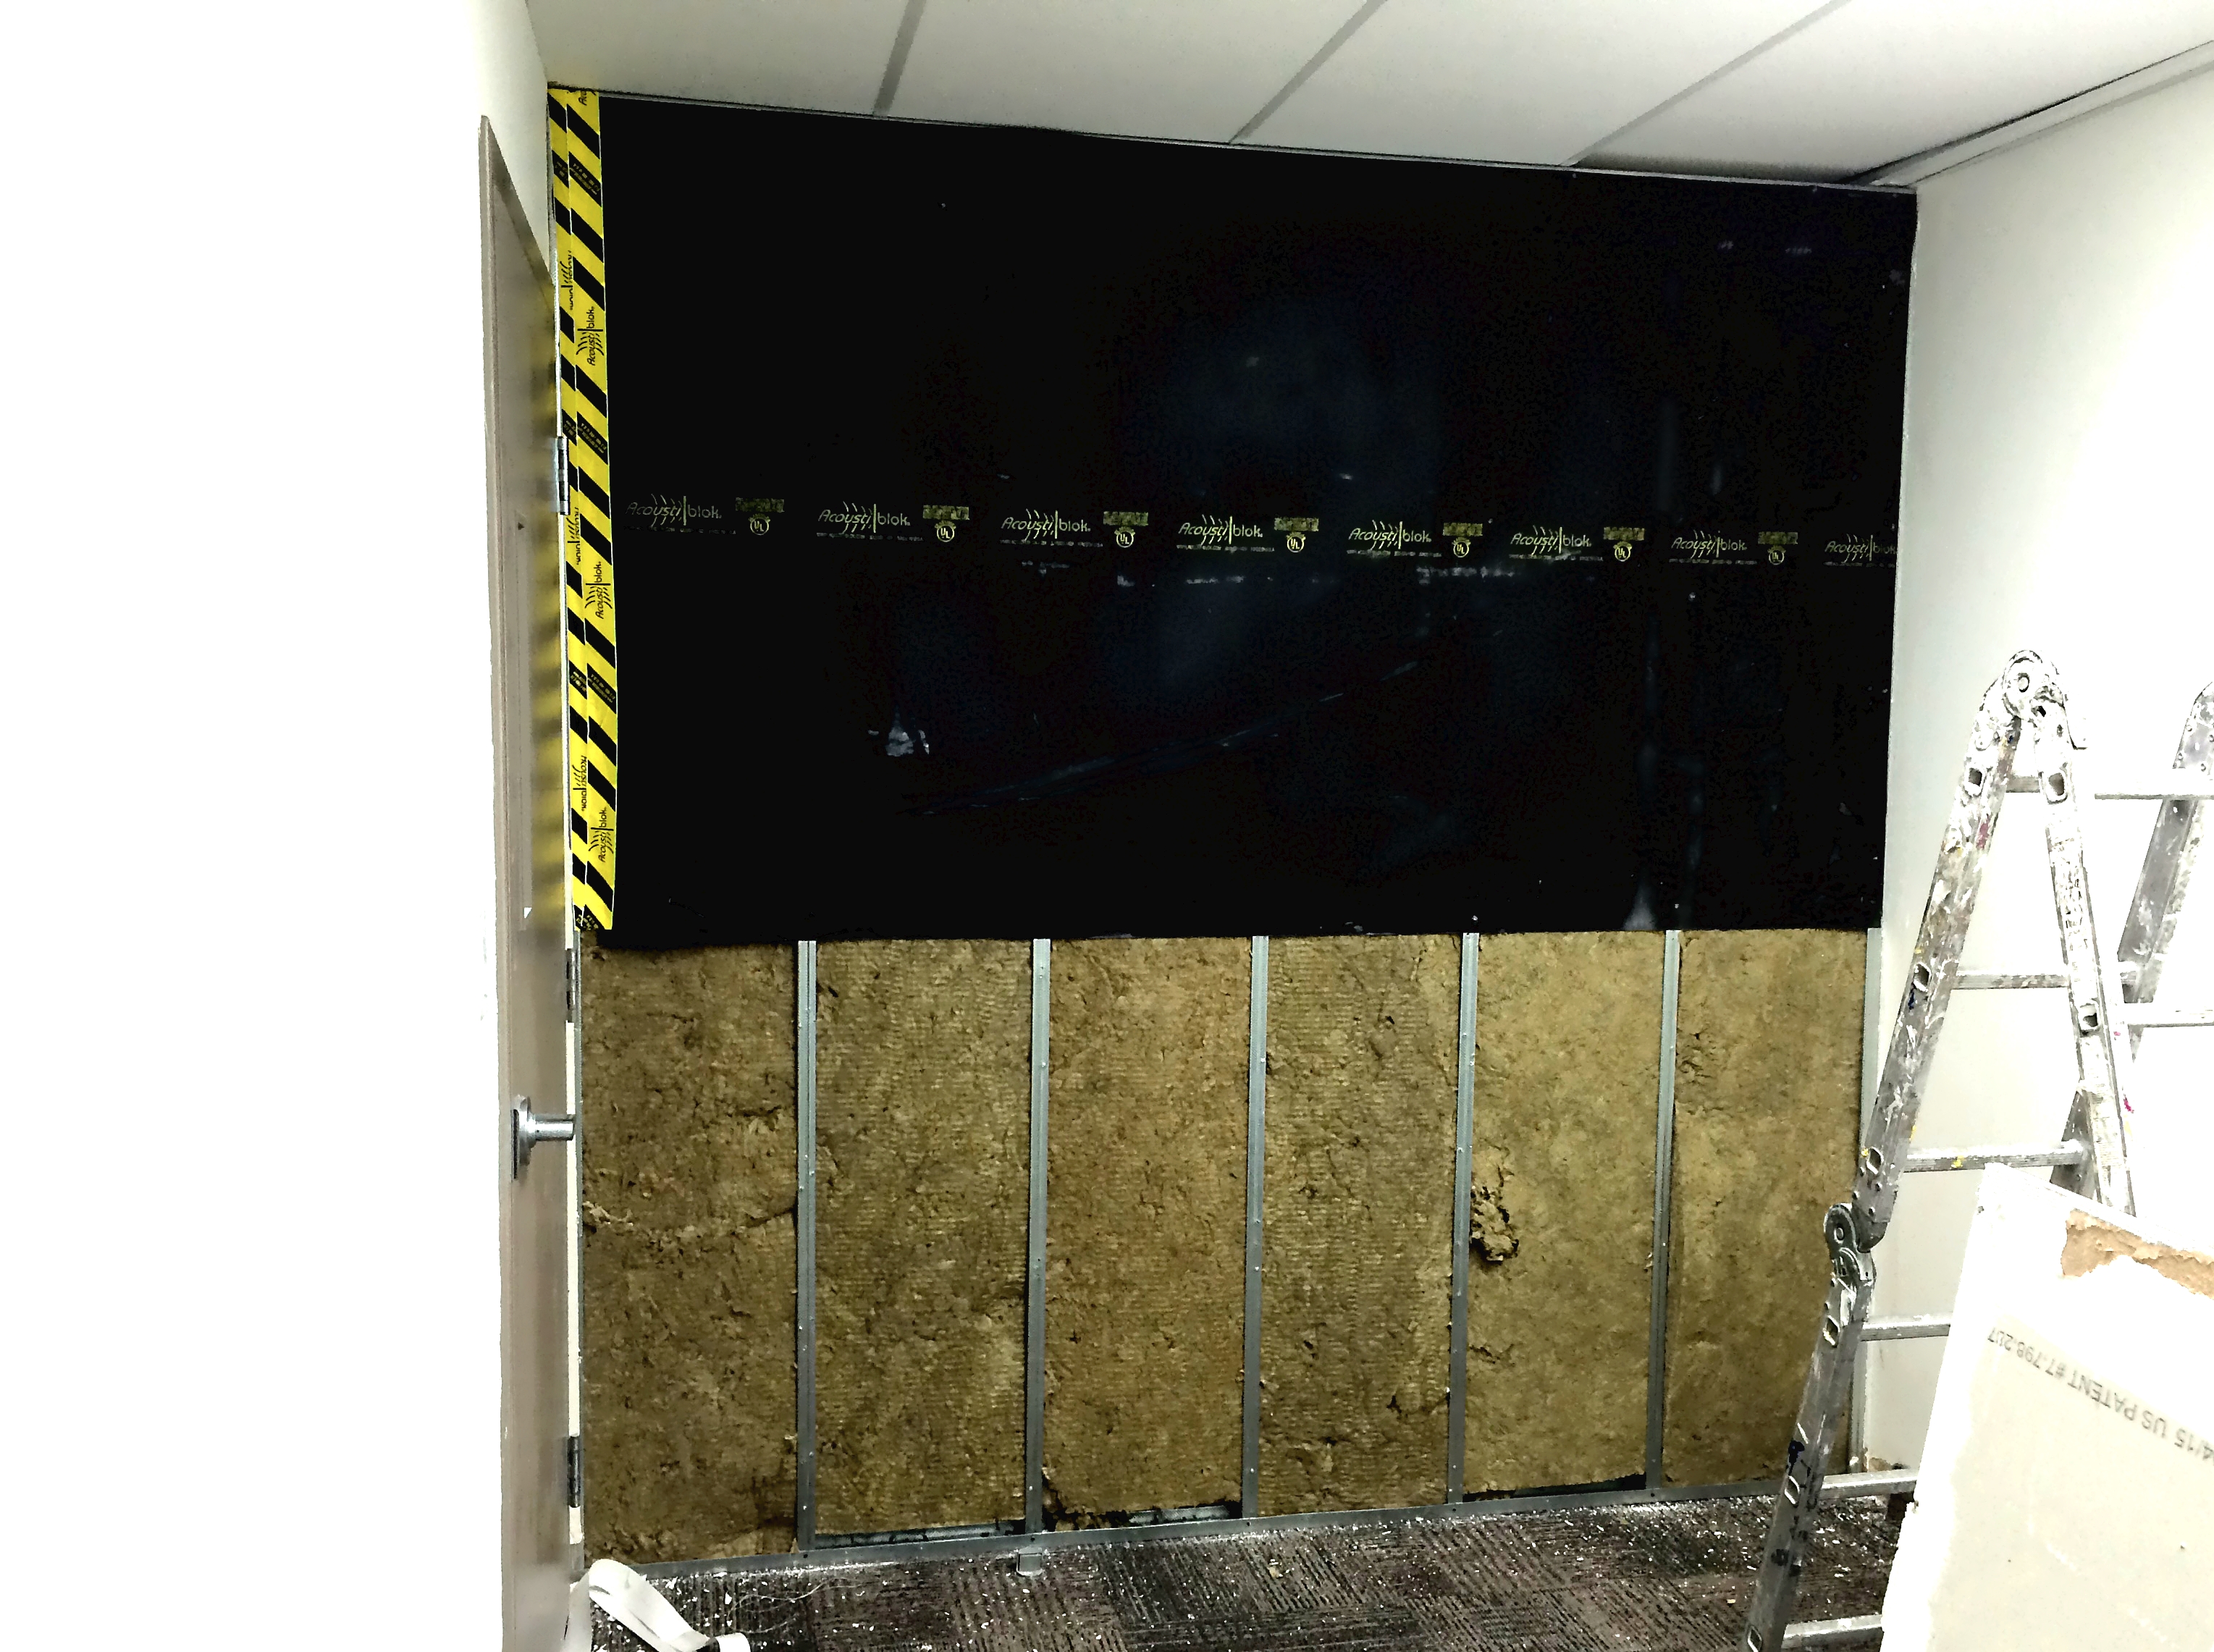 When securing Acoustiblok material to studs, using as few screws as possible reduces the amount of connectivity and maximizes the sound reduction of the wall.